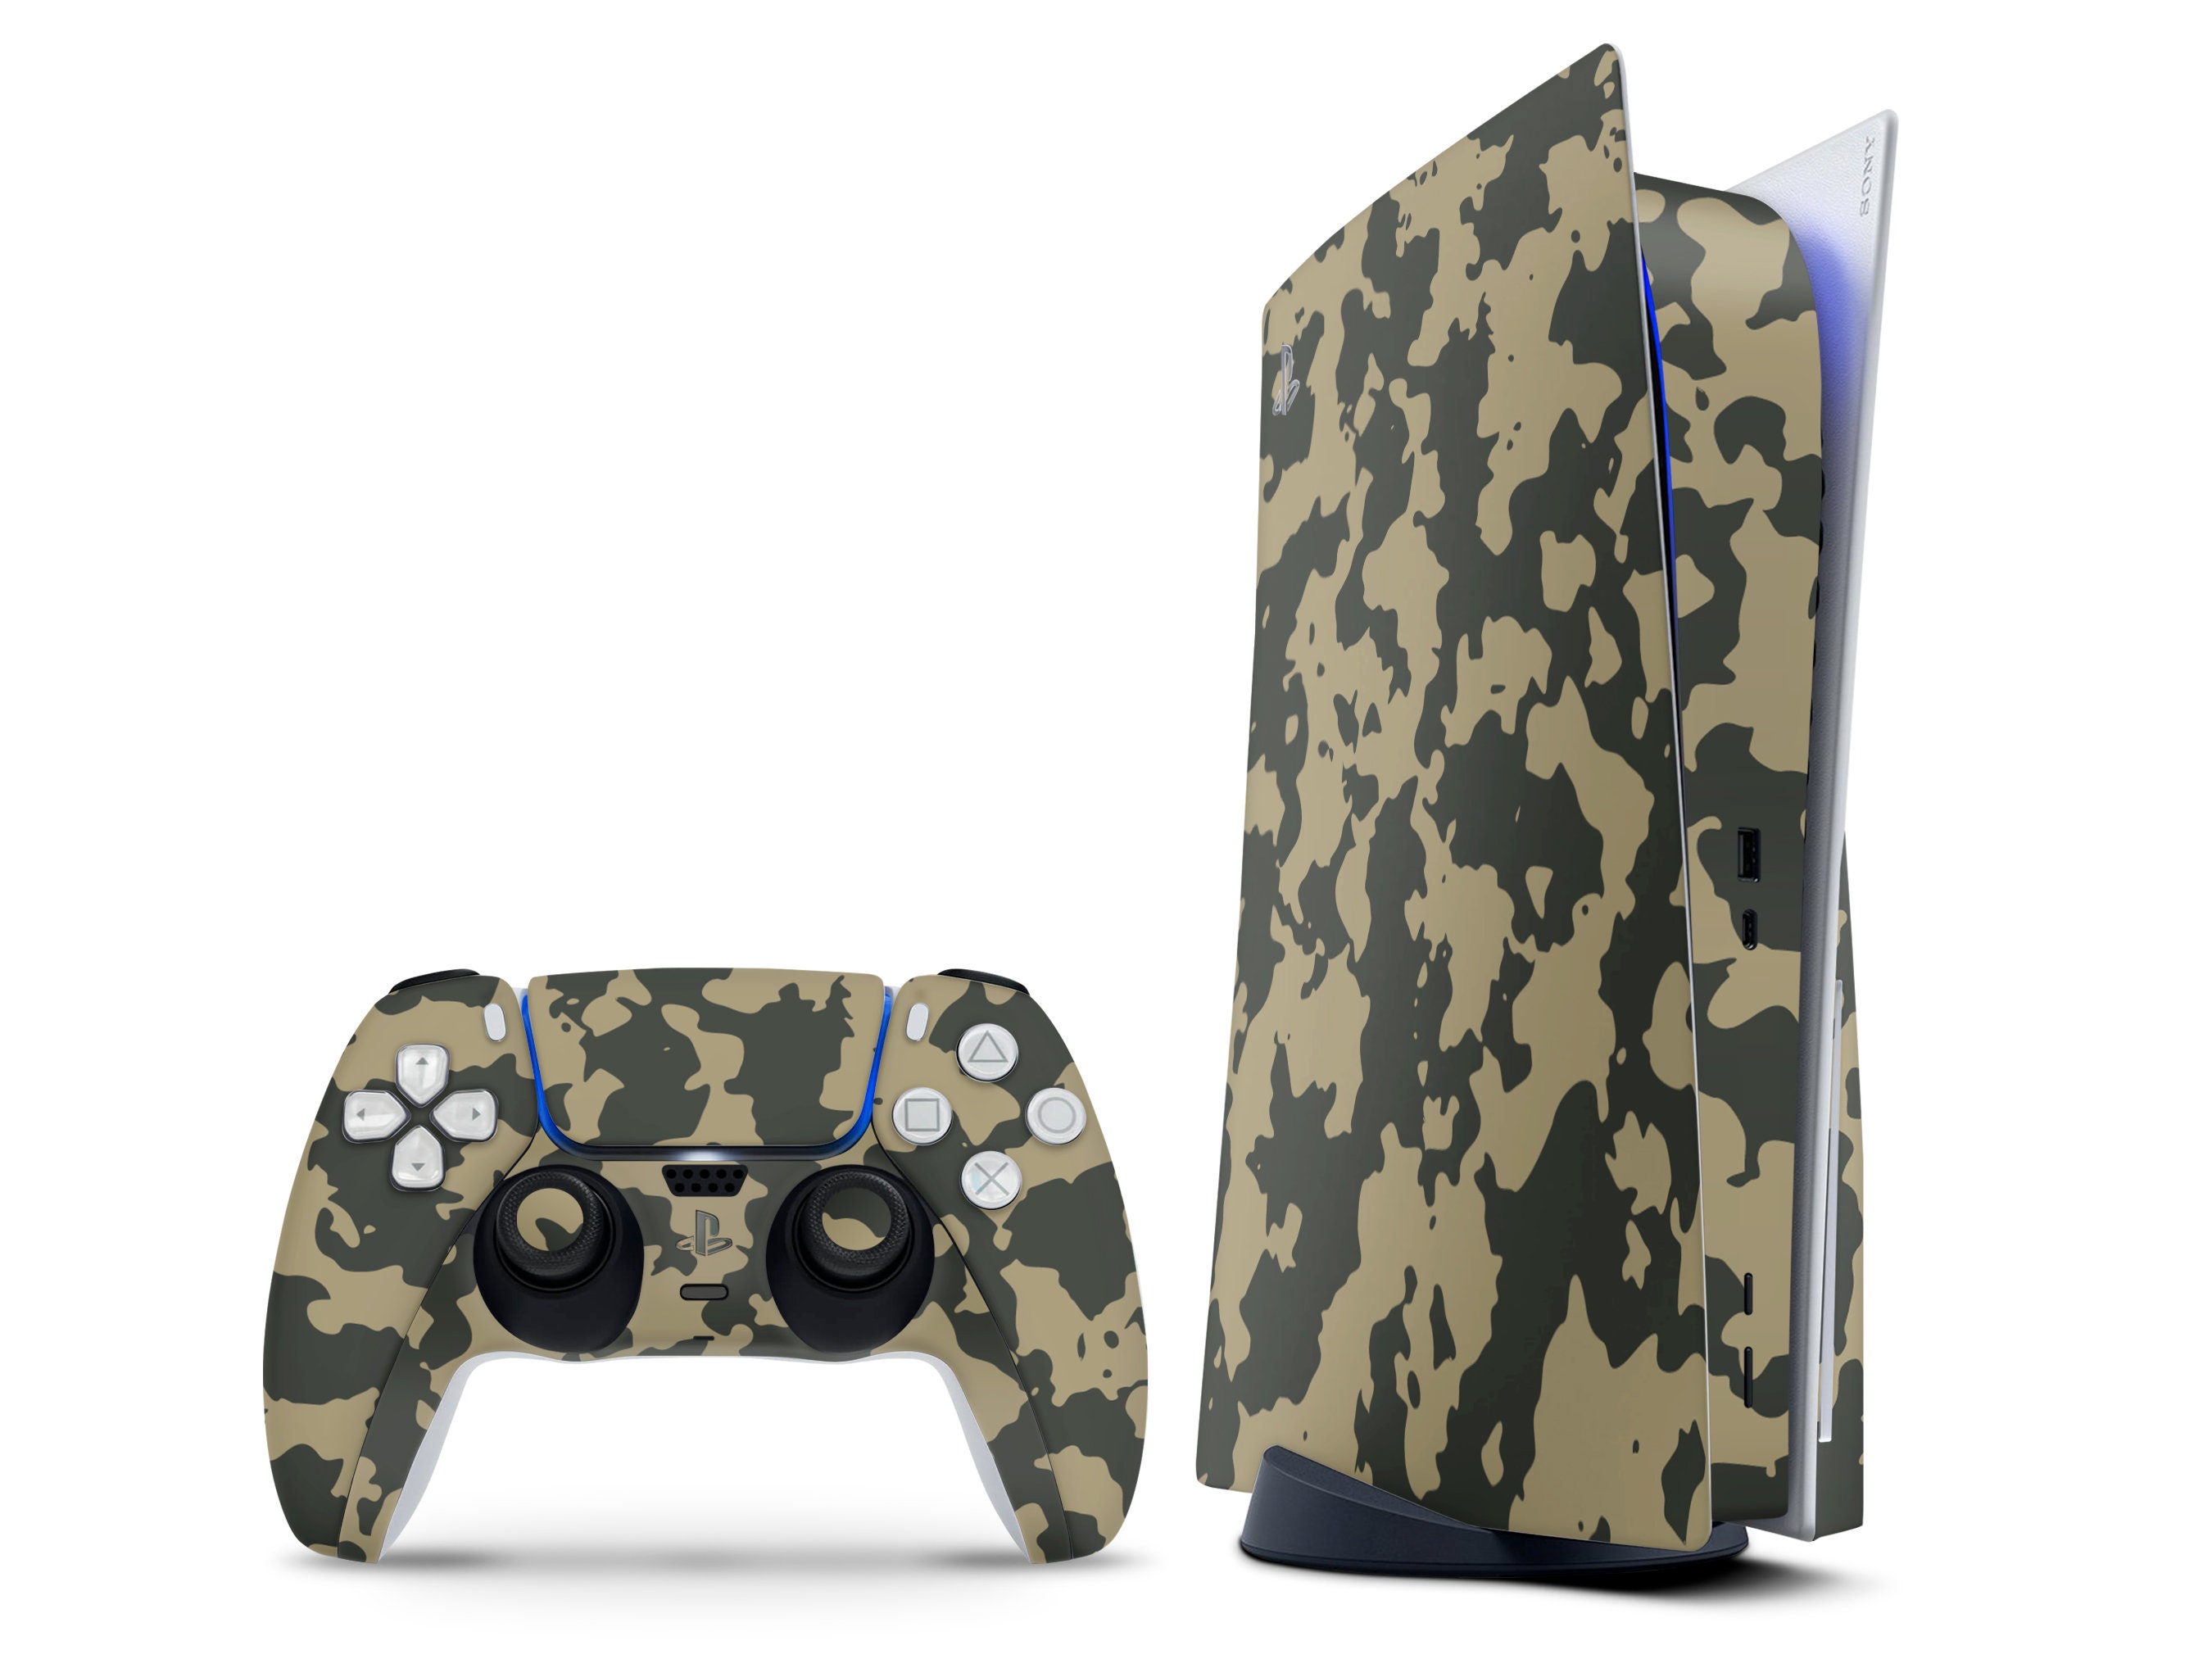 PS5 Disk Edition Skin Decal Vinilo Calcomana Wrap Aureate Color Golden Colour PlayStation 5 Dustproof Vinyl Gold Sticker Cover Case for Christmas Gift